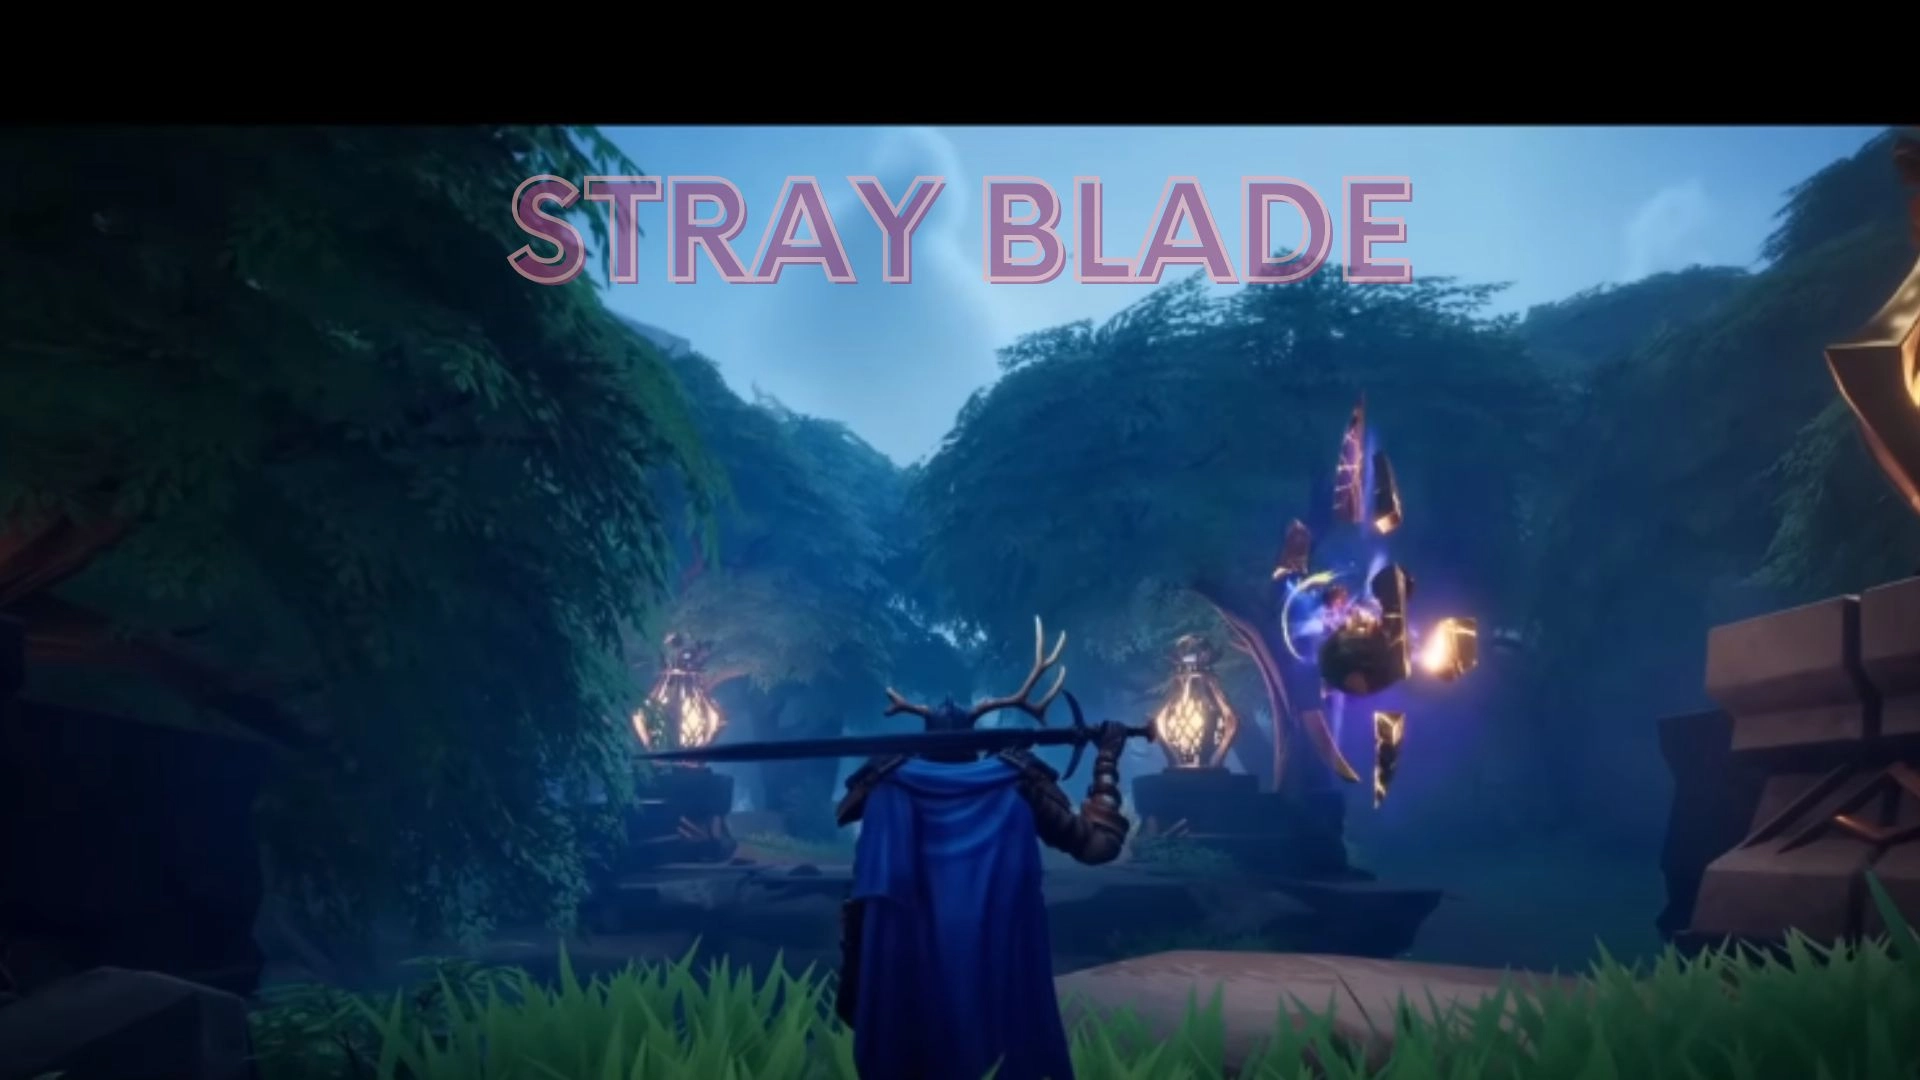 Stray Blade Parents Guide and Age Rating (2022)